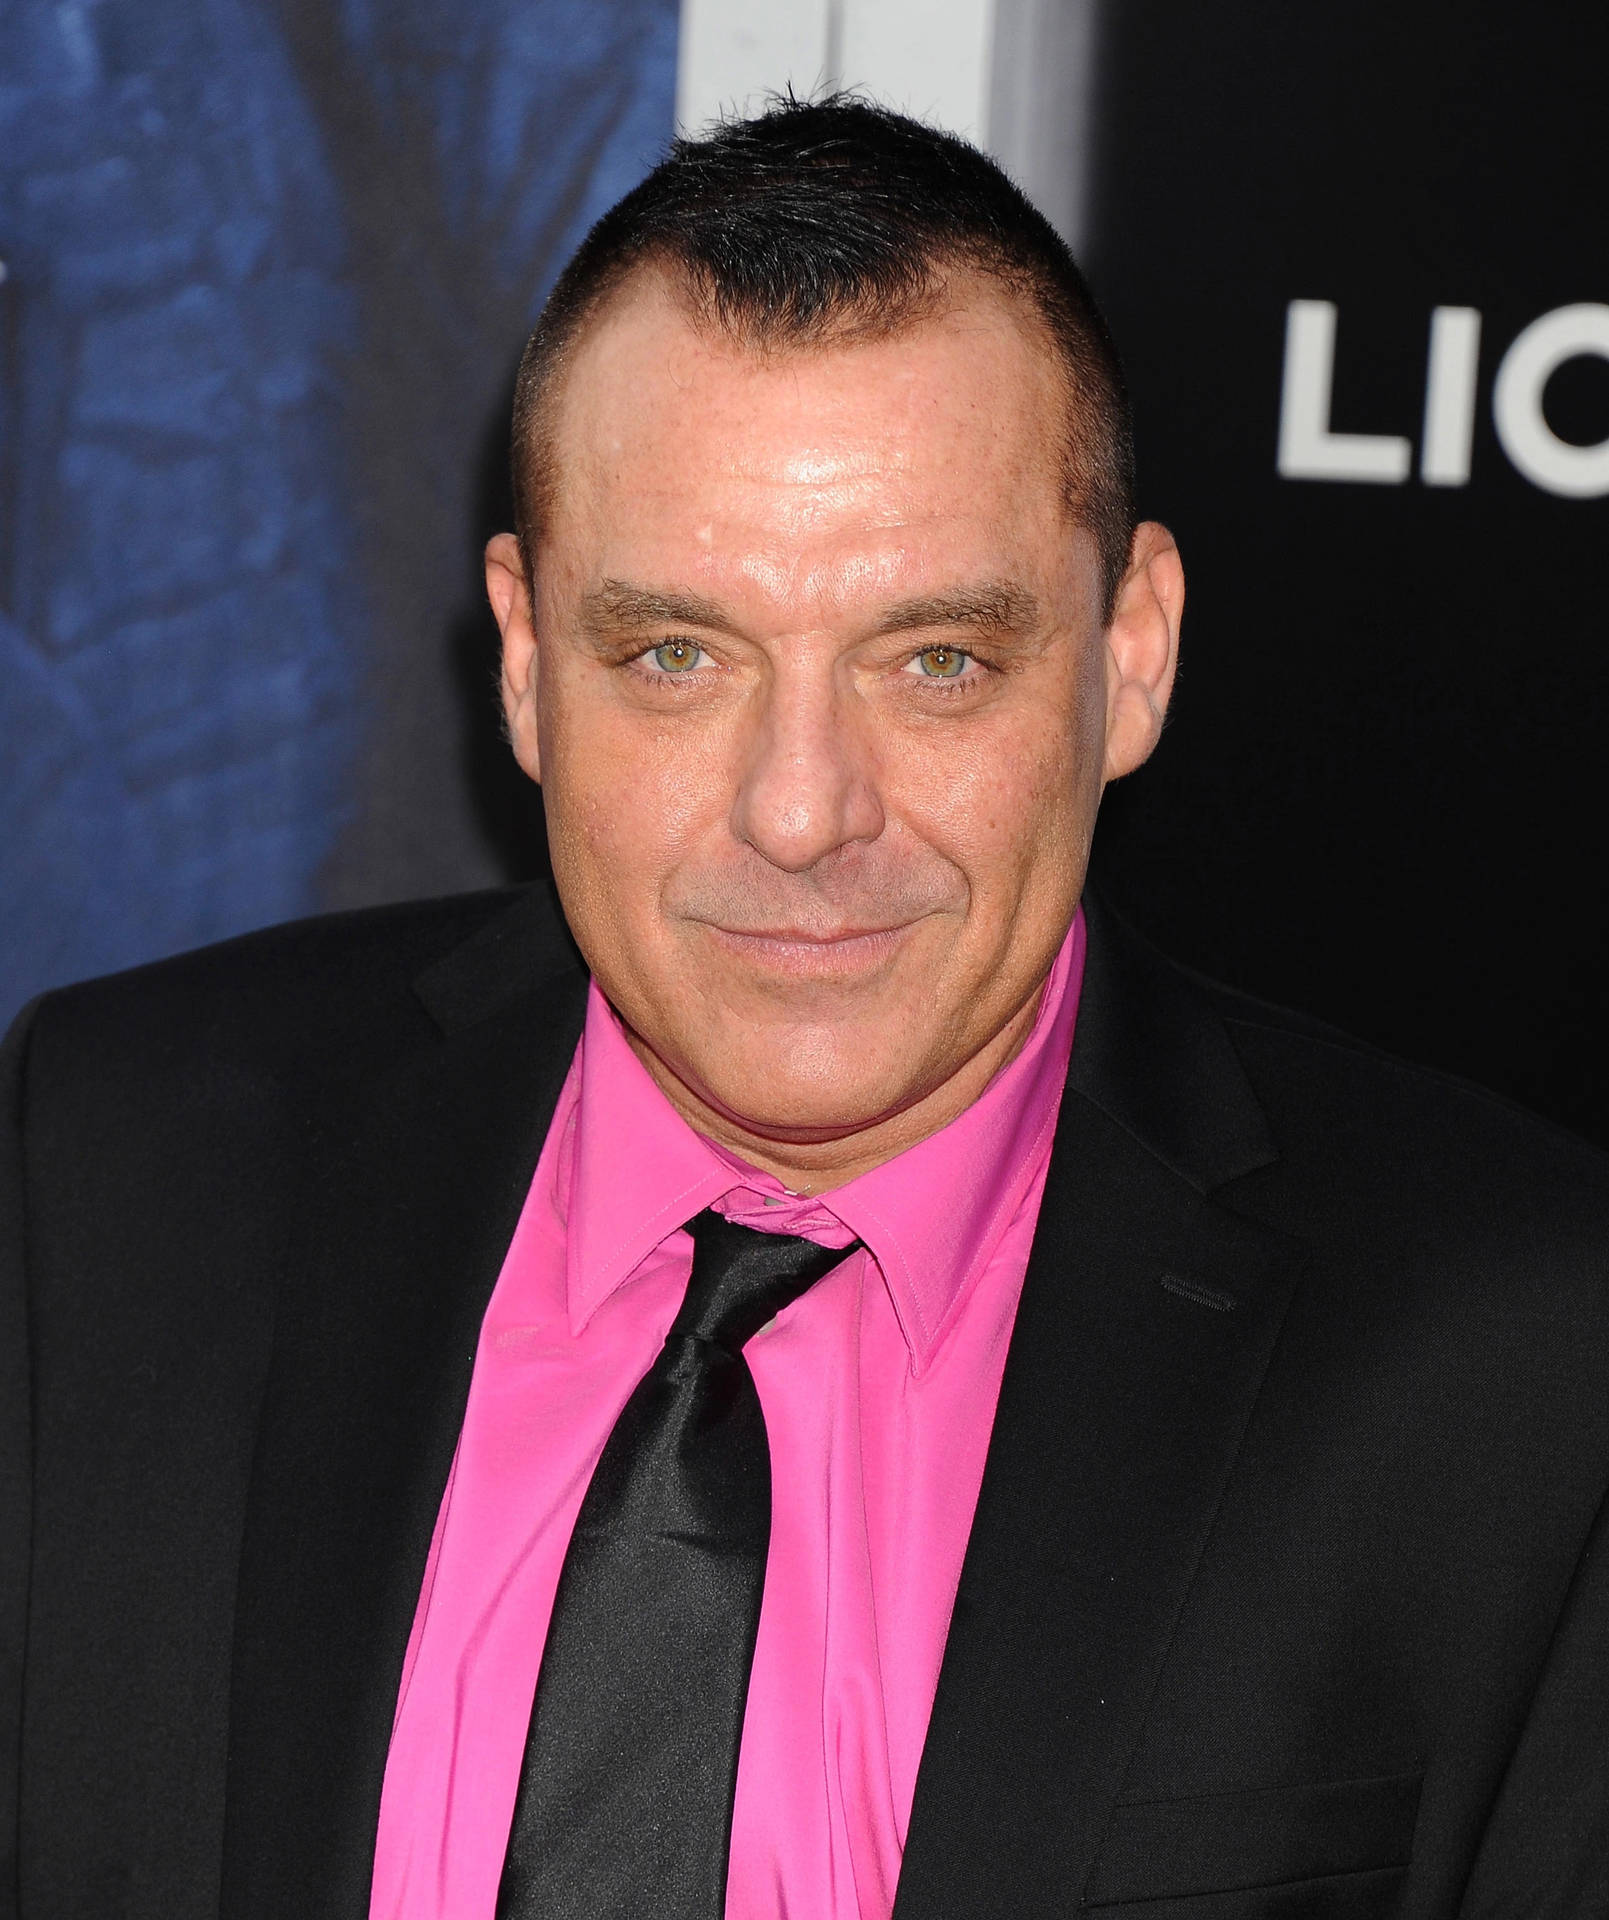 American Actor Tom Sizemore Premiere Of The Expendables 3 Wallpaper